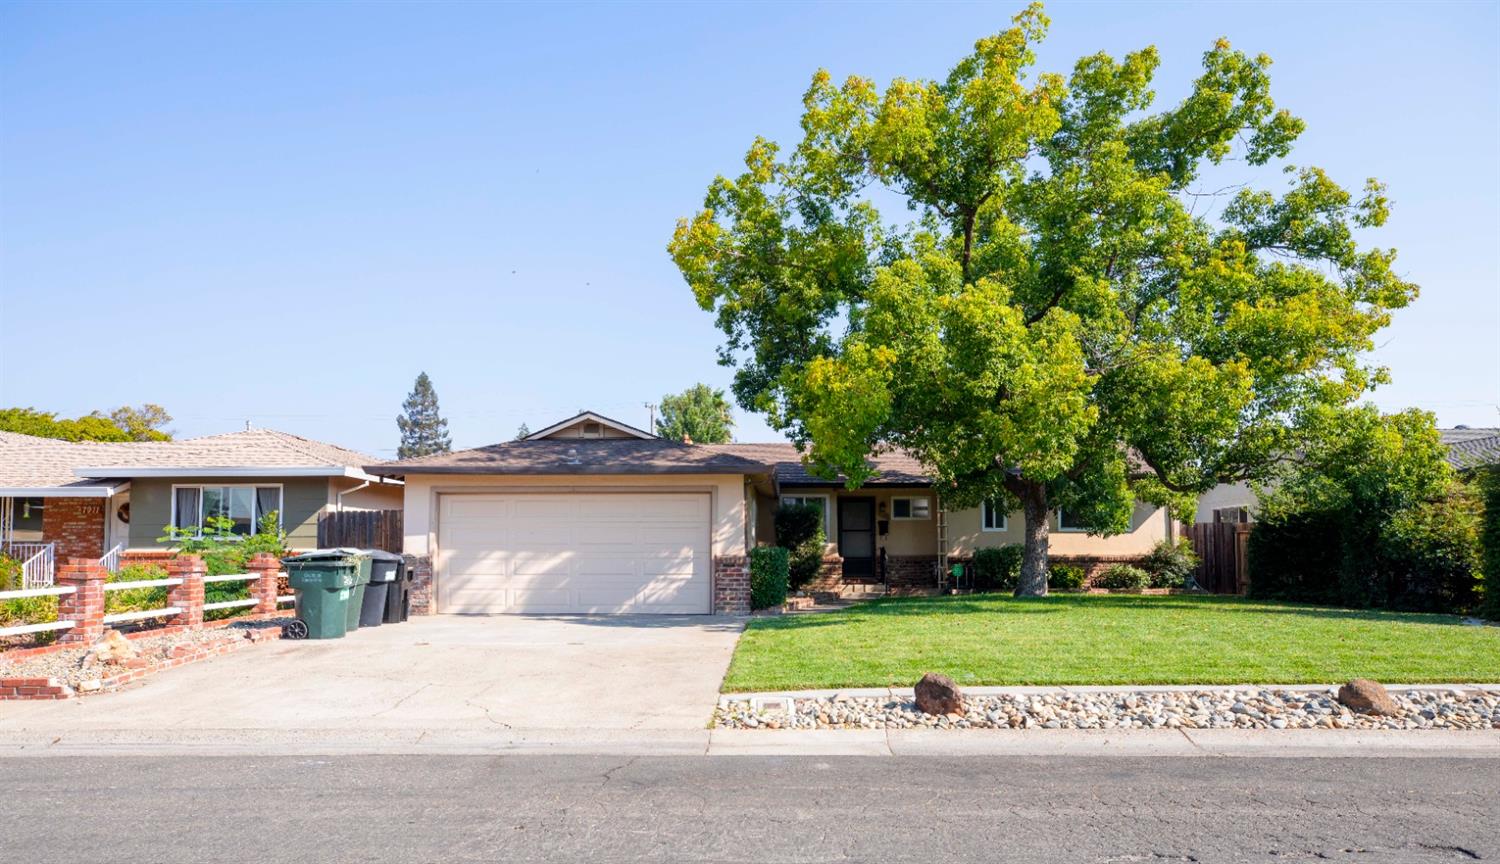 REMODELED & MOVE IN READY!  Single Family Residence located in Tokay Park Community. Property Featur